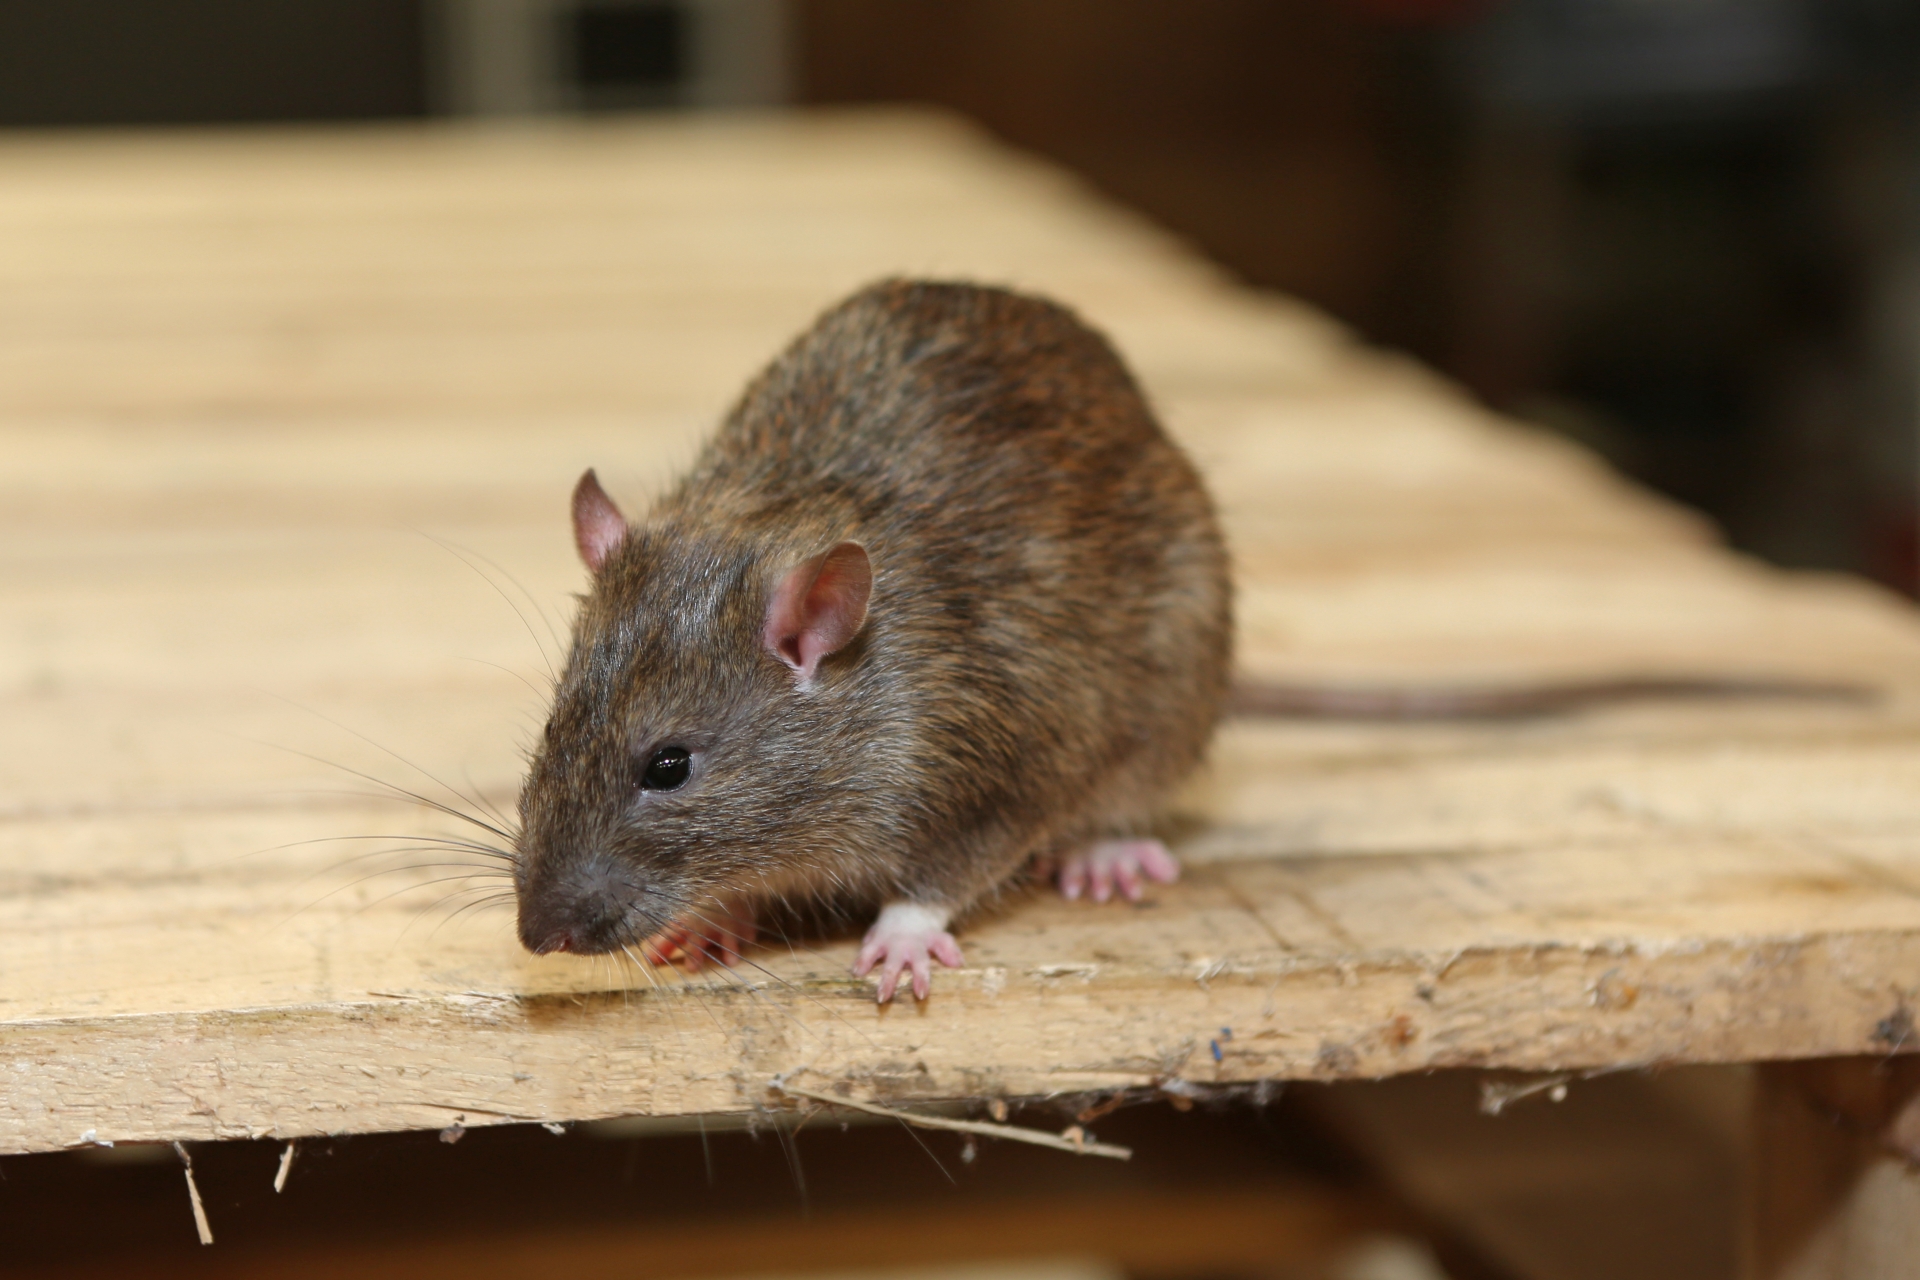 Rat extermination, Pest Control in South Stifford, West Thurrock, RM20. Call Now 020 8166 9746